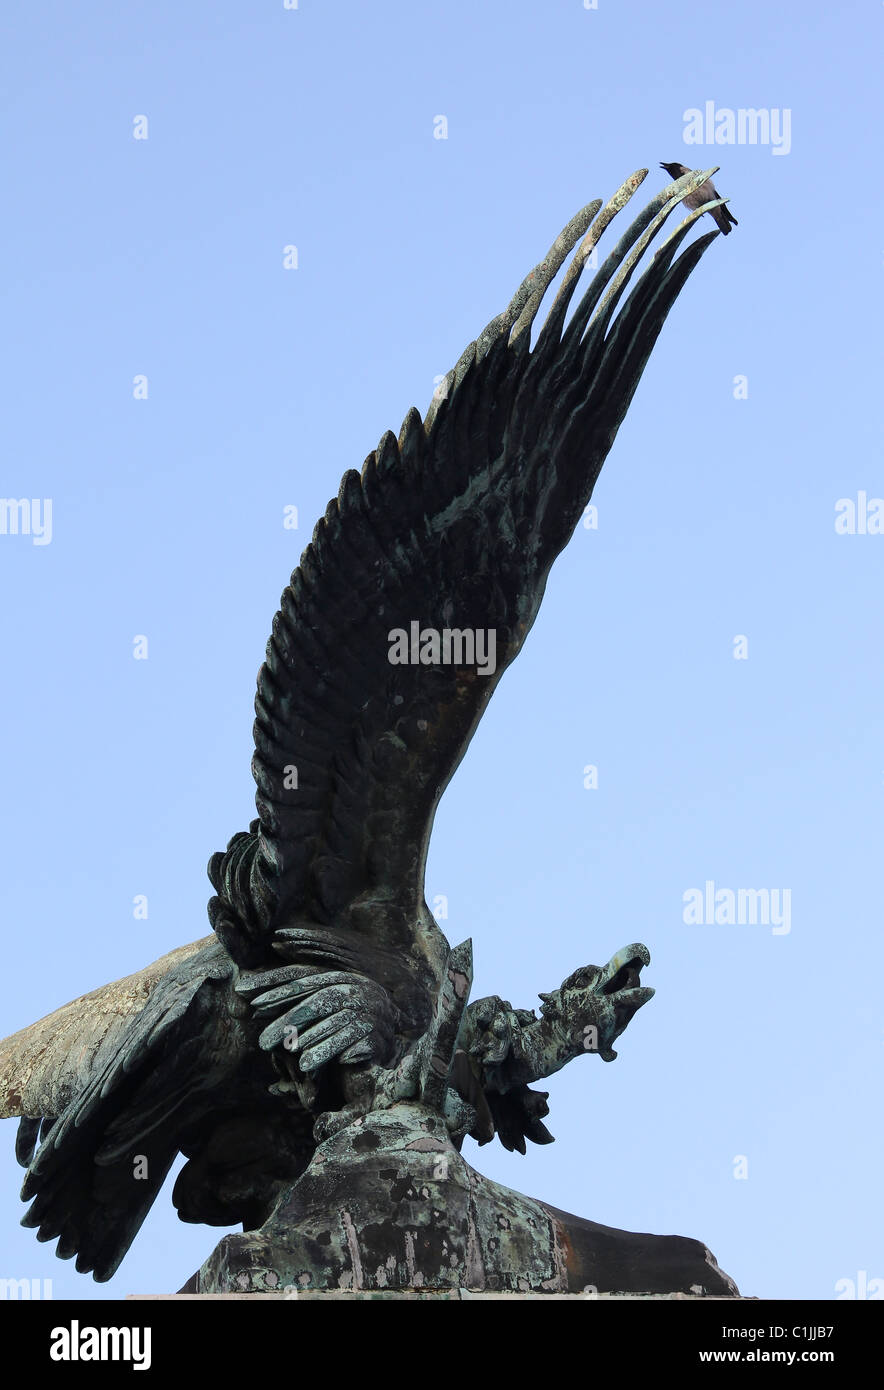 Crow's is on the wing of the turul sculpture. Stock Photo